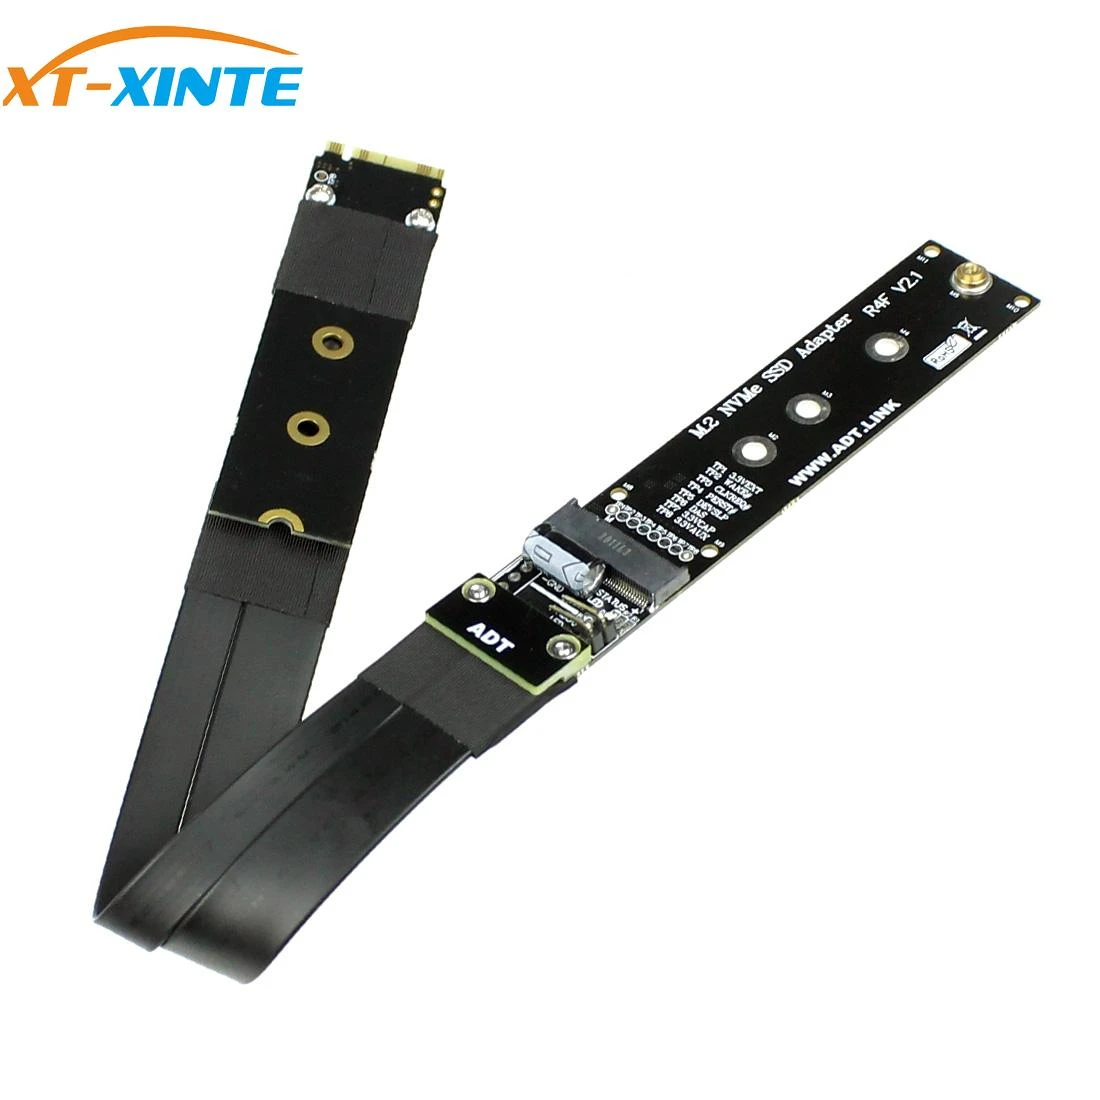 M.2 NVMe SSD Solid State Drive Extension Cable Riser Card Support M2 M Key PCI-E 3.0 x4 4 pcie 4X Full Speed ADT 32G/BPS R44SF 60cm 